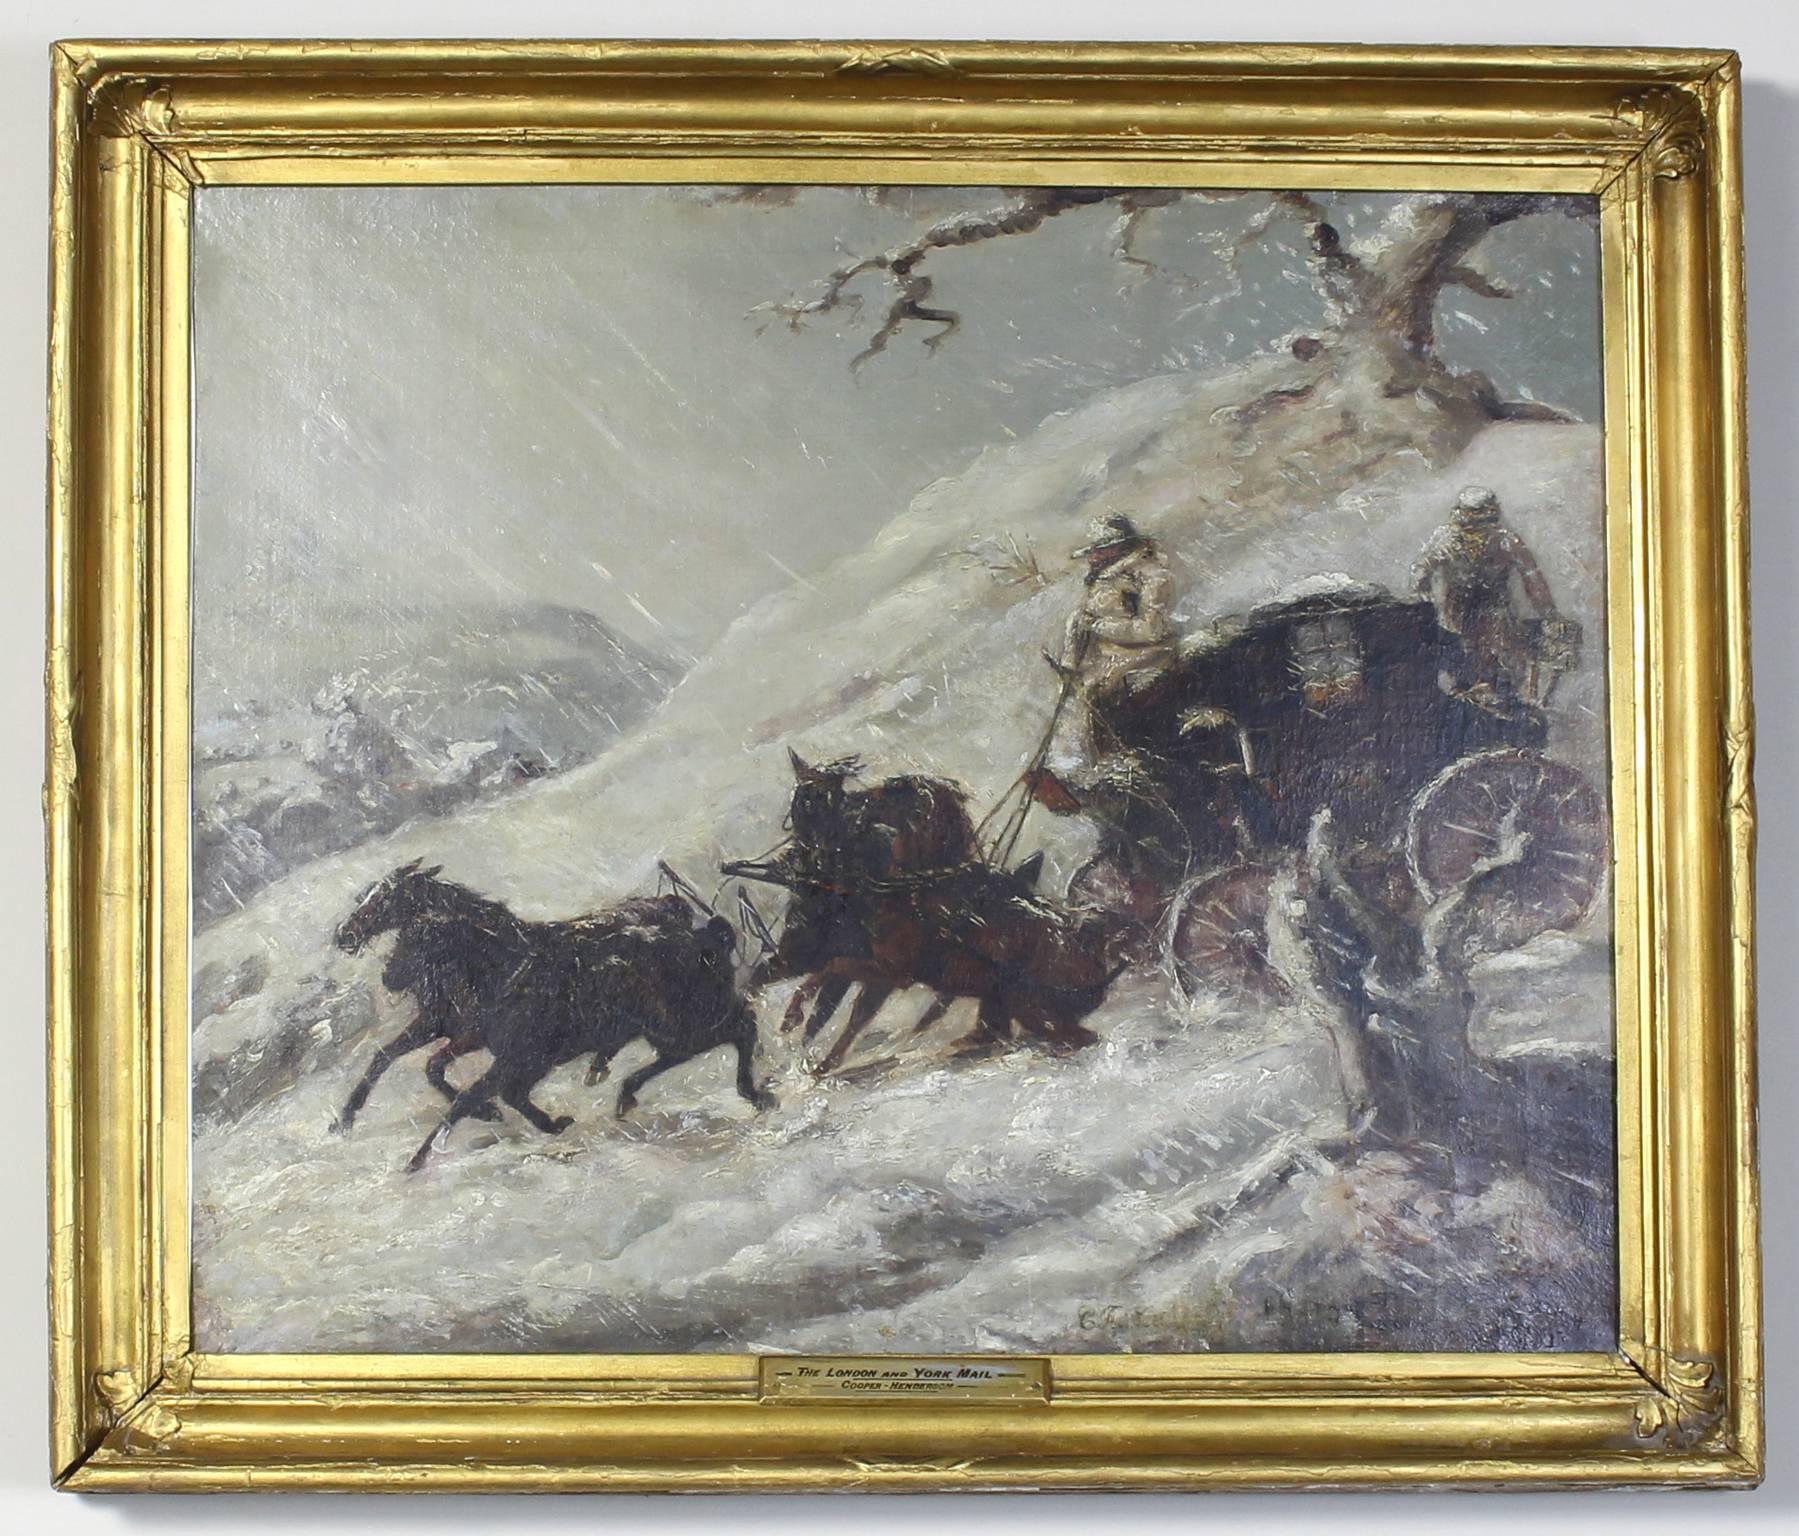 A beautiful painting by Charles Cooper Henderson (English 1803-1877) depicting a coaching scene in a snow storm. Henderson was known for painting horses and coaches. Lined oil on canvas in original giltwood frame.